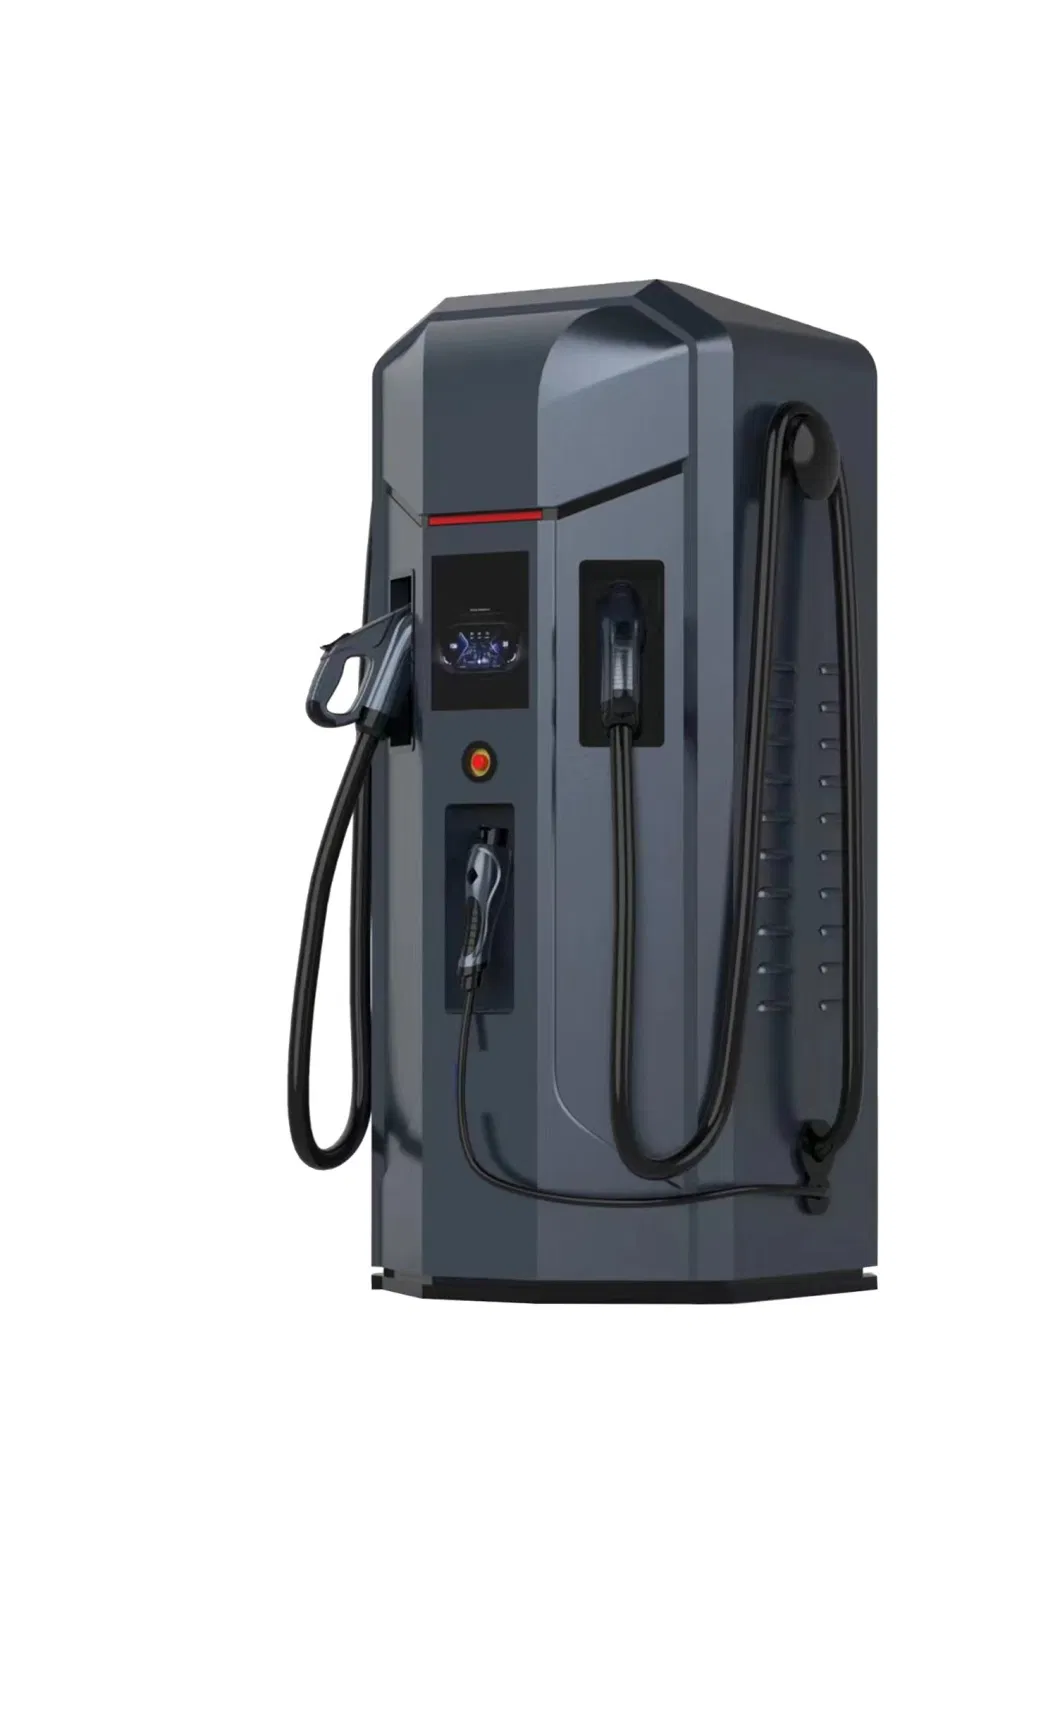 DC-120kw Commercial Three Gun Electric Vehicle Charging Station